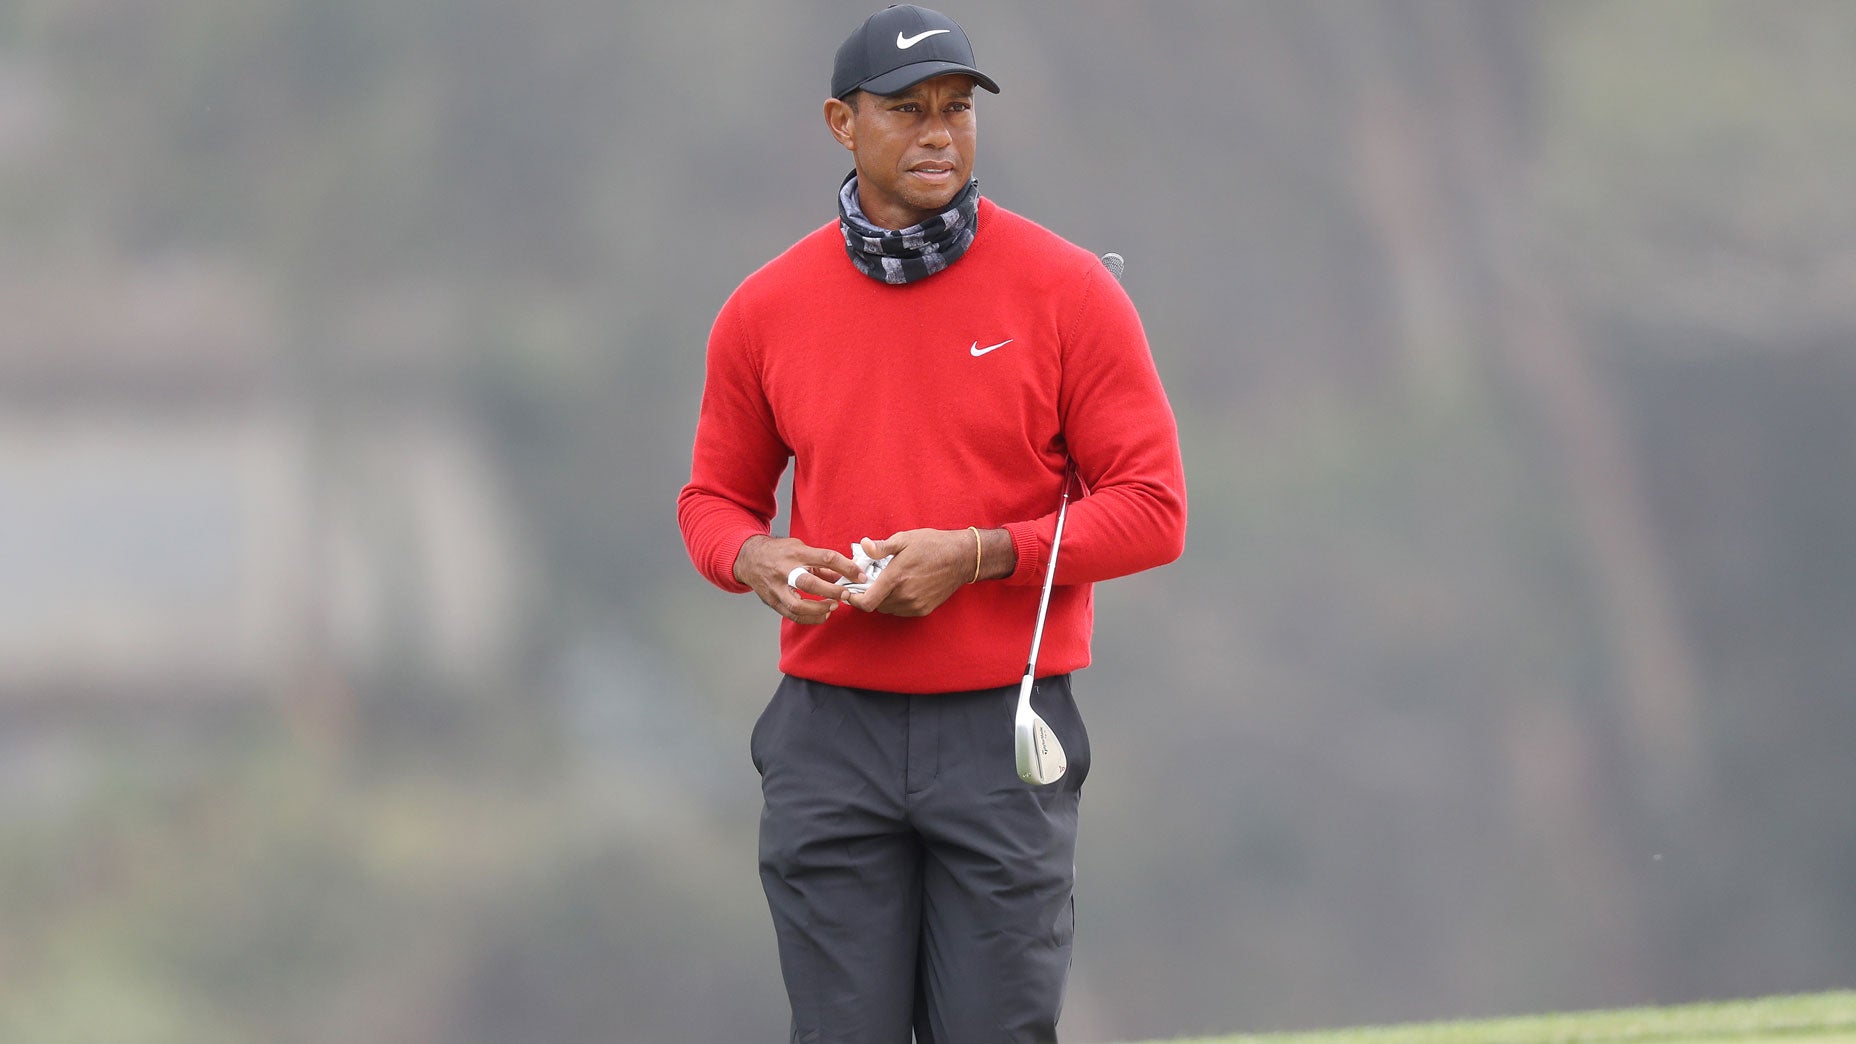 Tiger Woods hints at future schedule, expectations after PGA finish